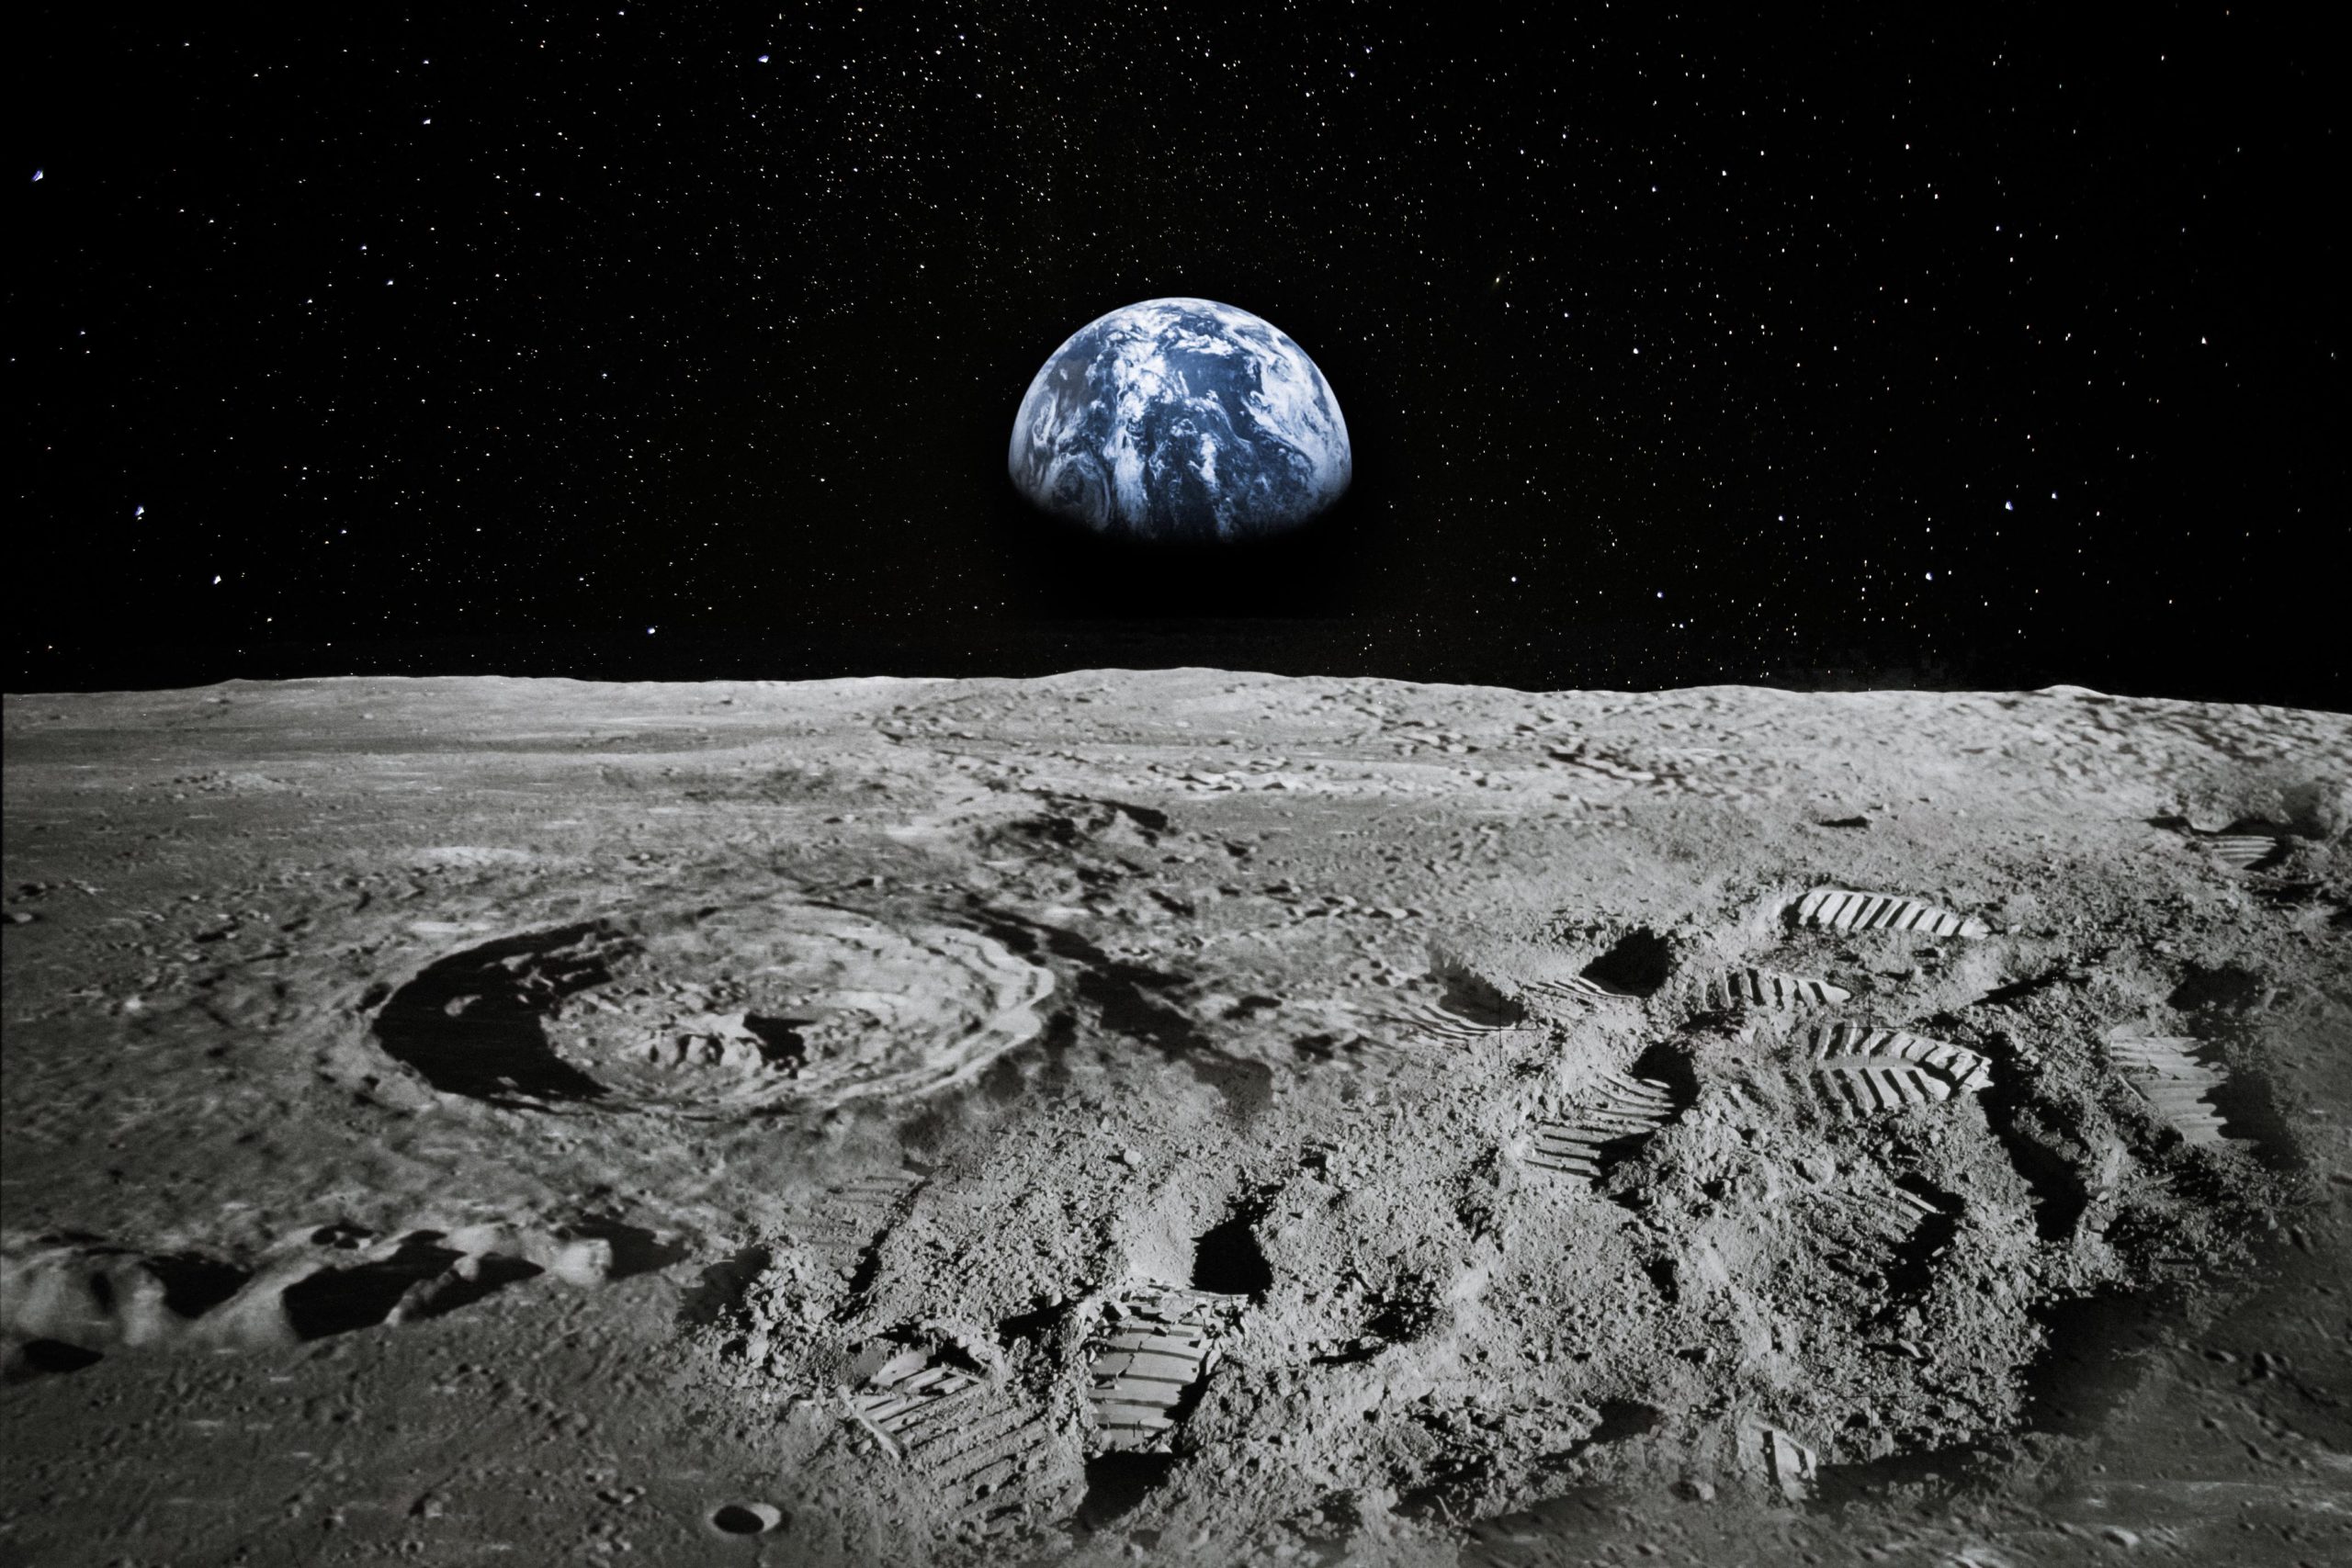 Lunar Icy Regolith and Controlled Low Strength Materials Webinar